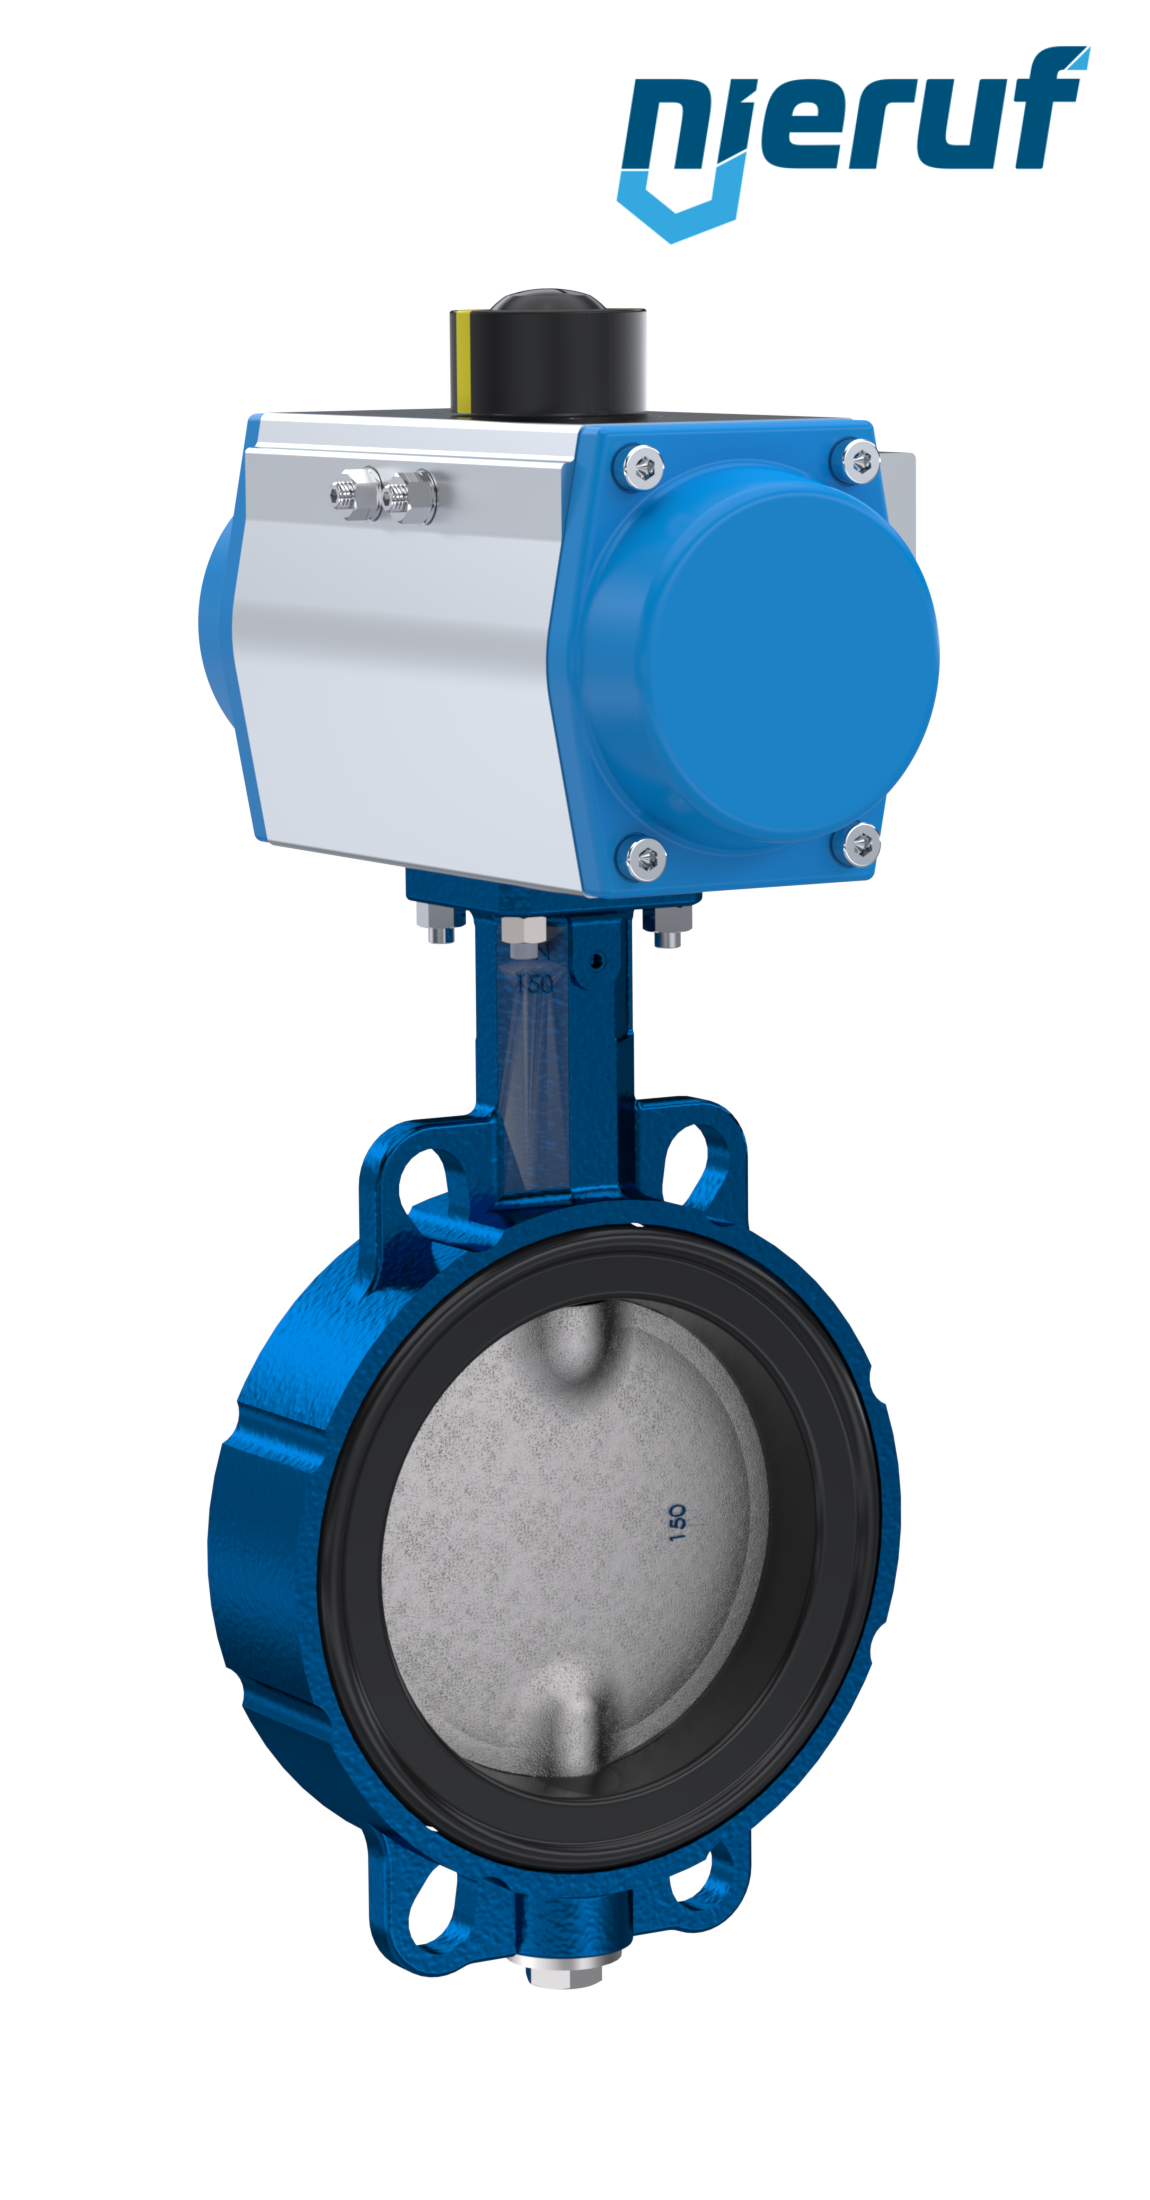 Butterfly valve DN 150 AK01 EPDM DVGW drinking water, WRAS, ACS, W270 pneumatic actuator double acting